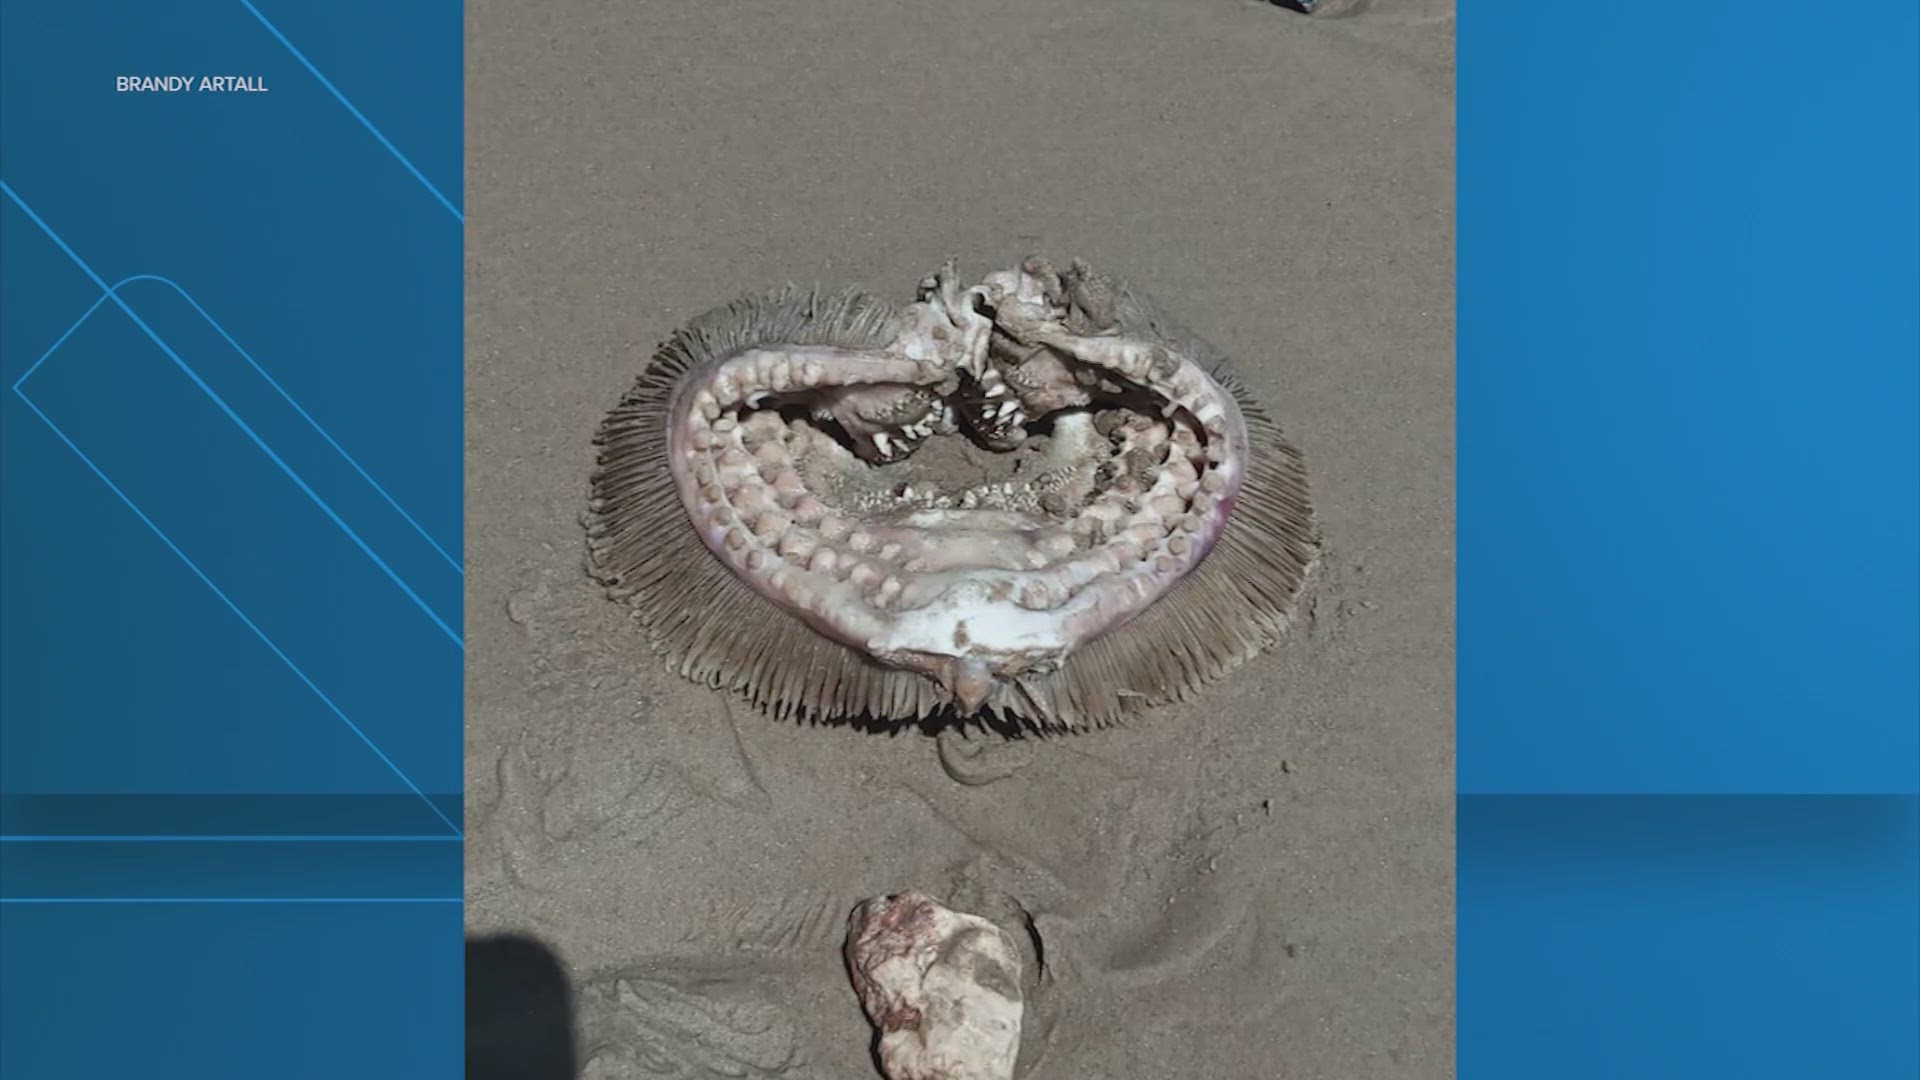 A woman asked Facebook users if anyone knew what the creature is. "That's a big pile of nope is what that is," one wrote. "Death!!! RUN!!" said another.